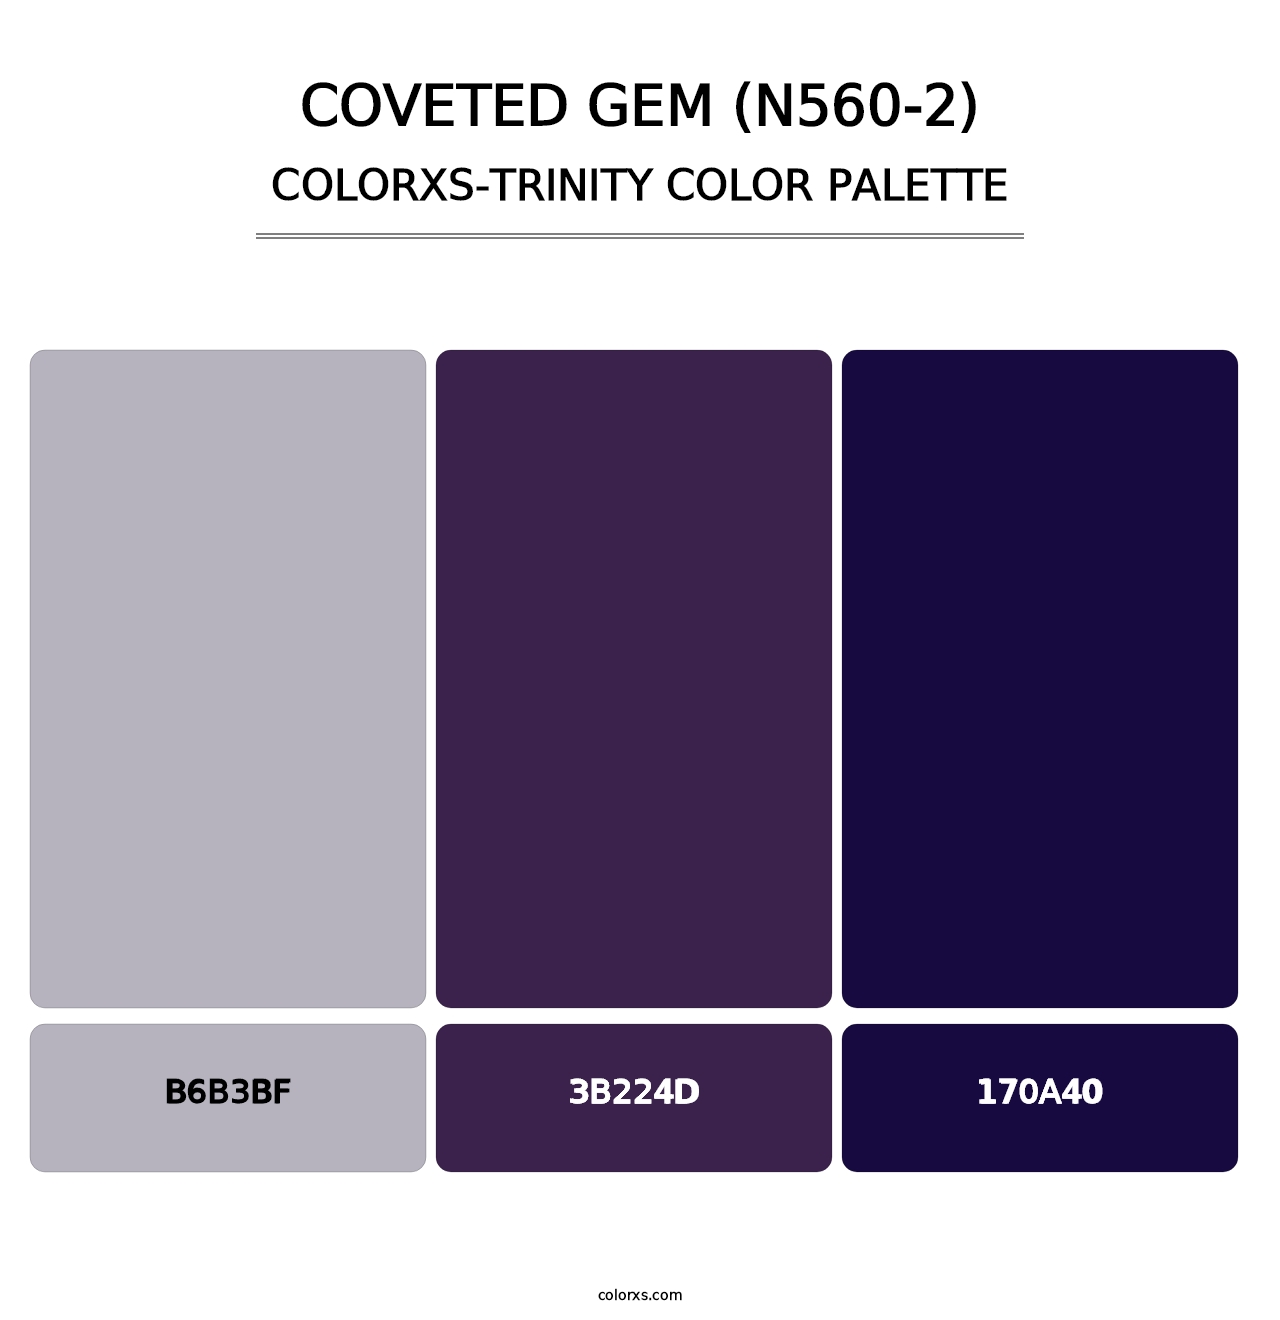 Coveted Gem (N560-2) - Colorxs Trinity Palette